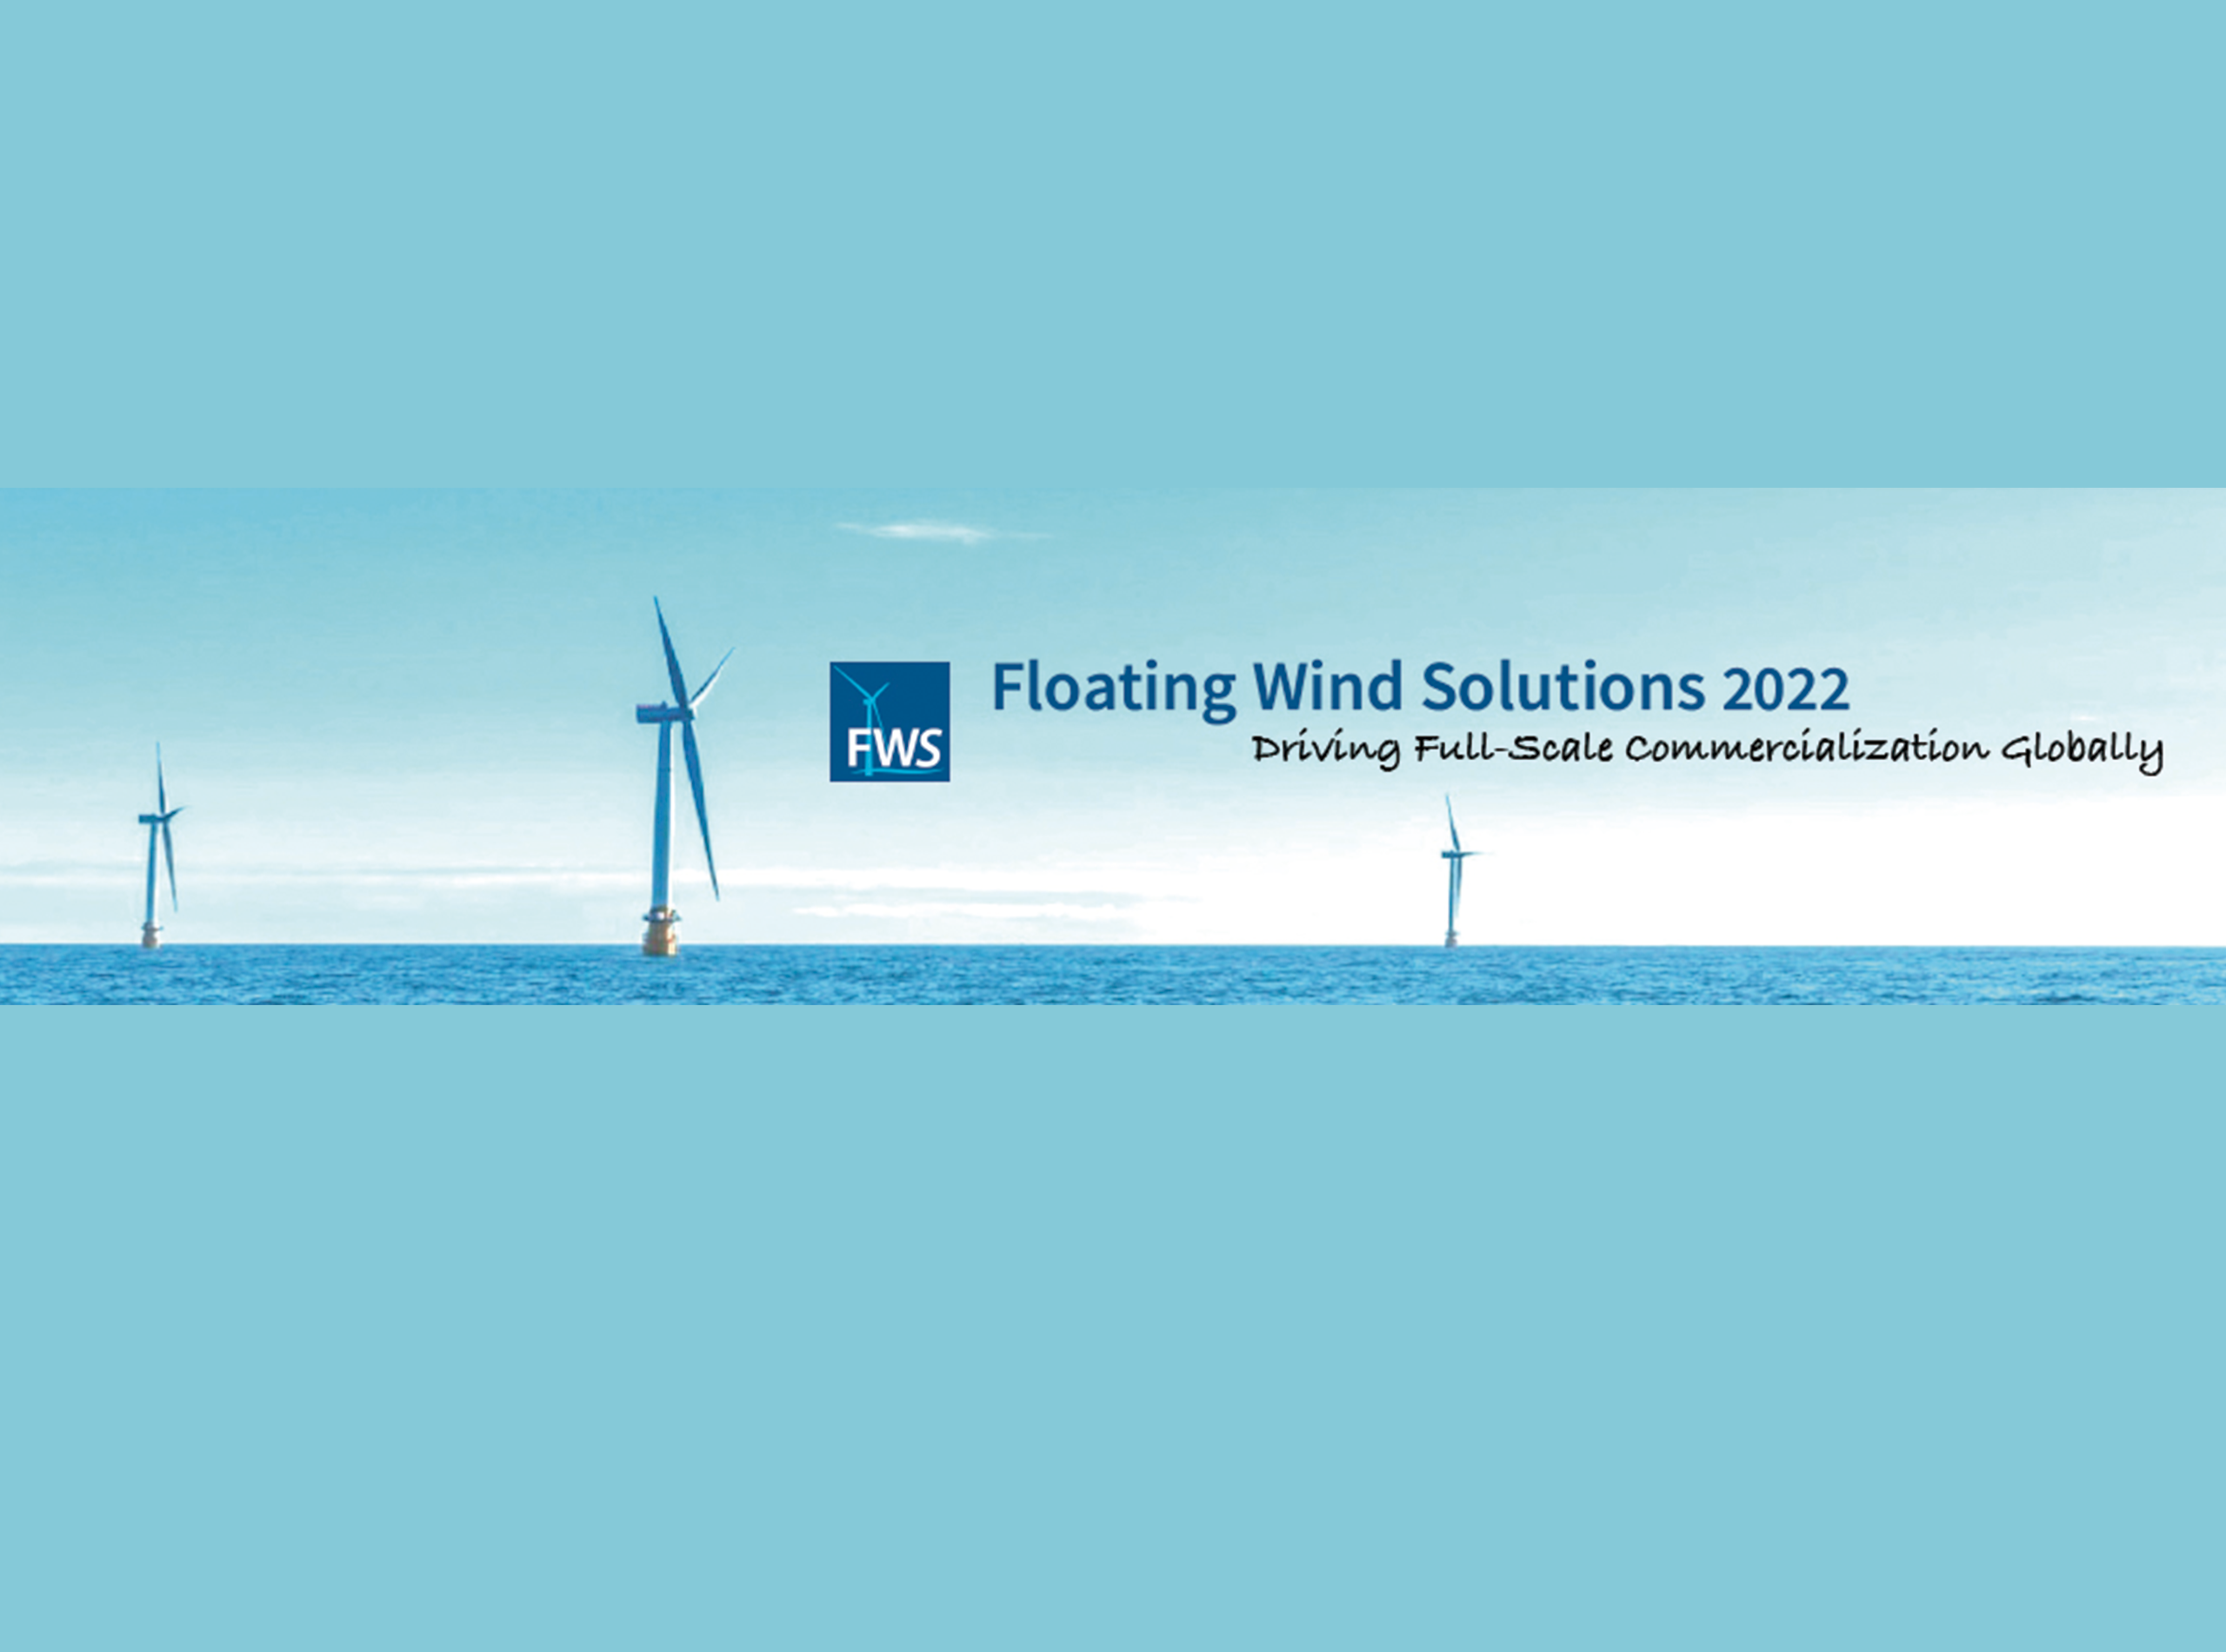 Floating Wind Solutions 2022